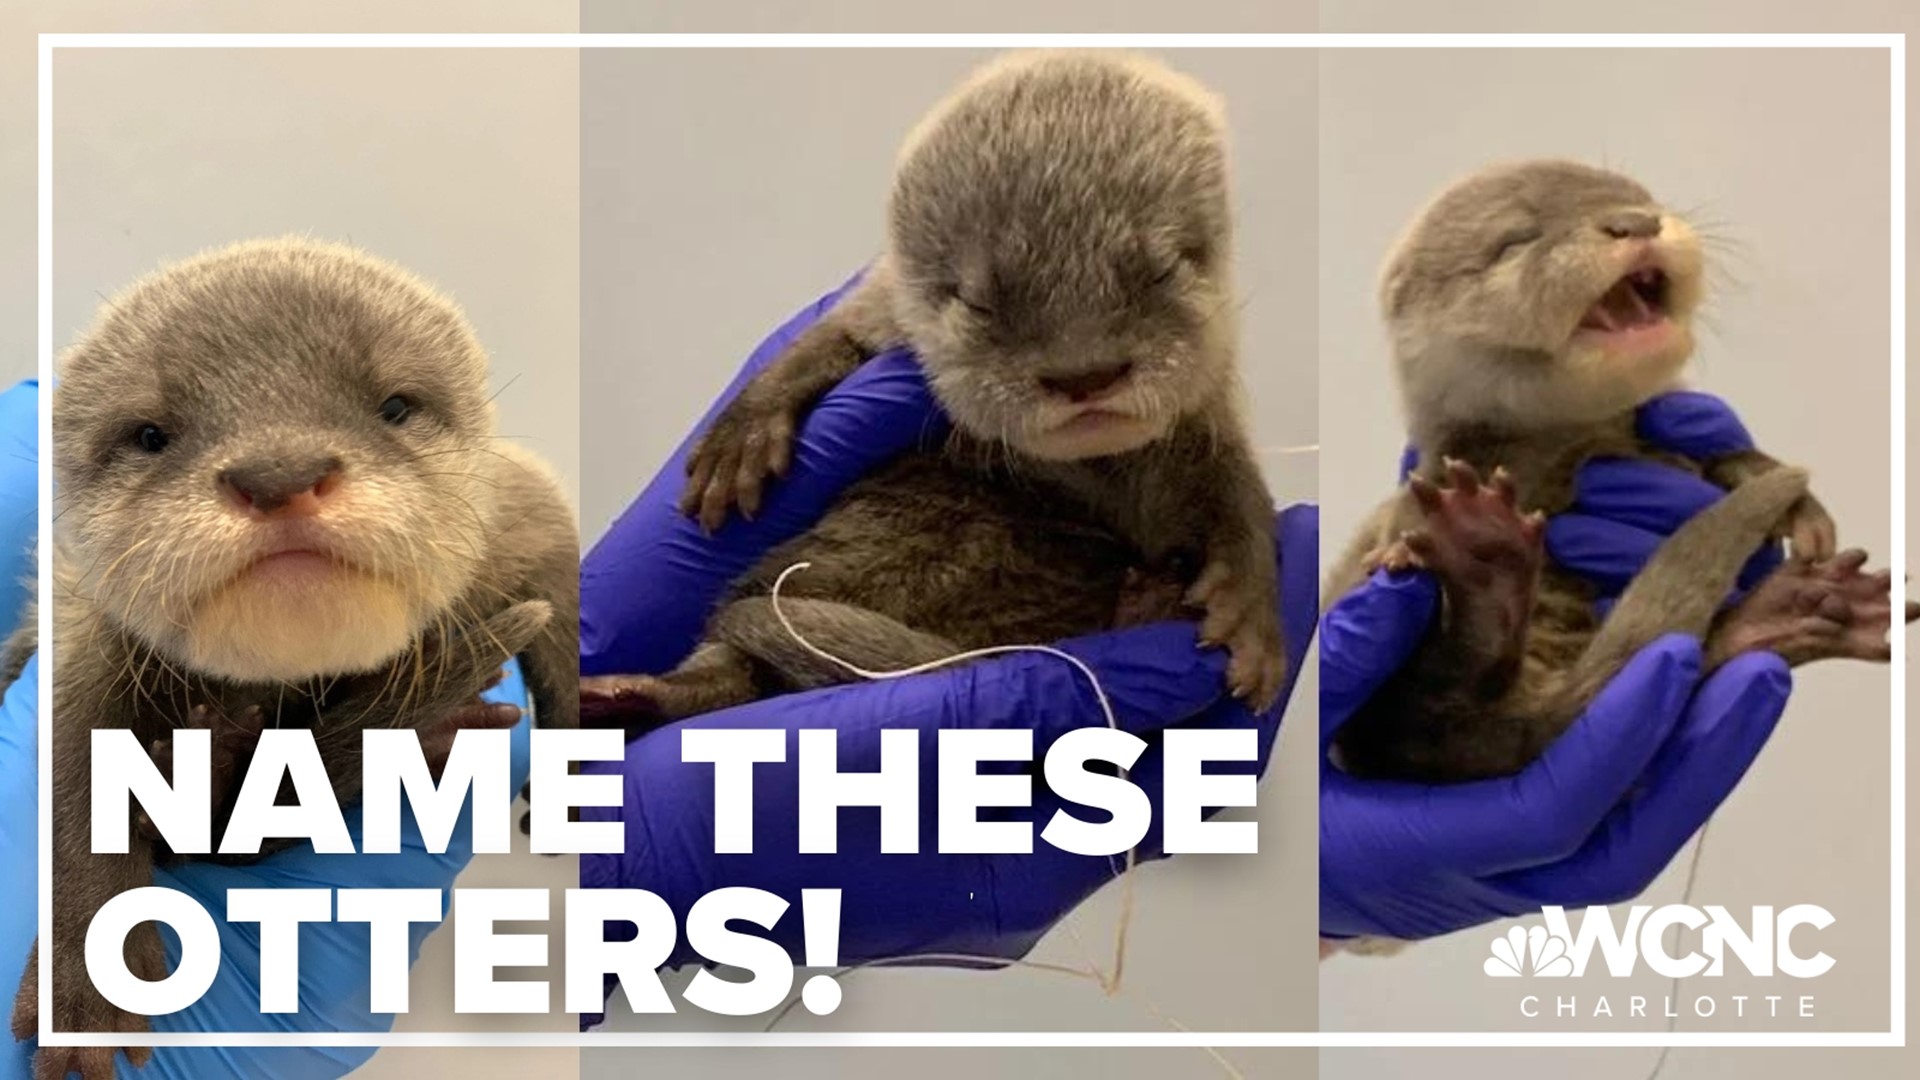 North Carolina Aquariums is inviting the public to help name its two newest otter pups.